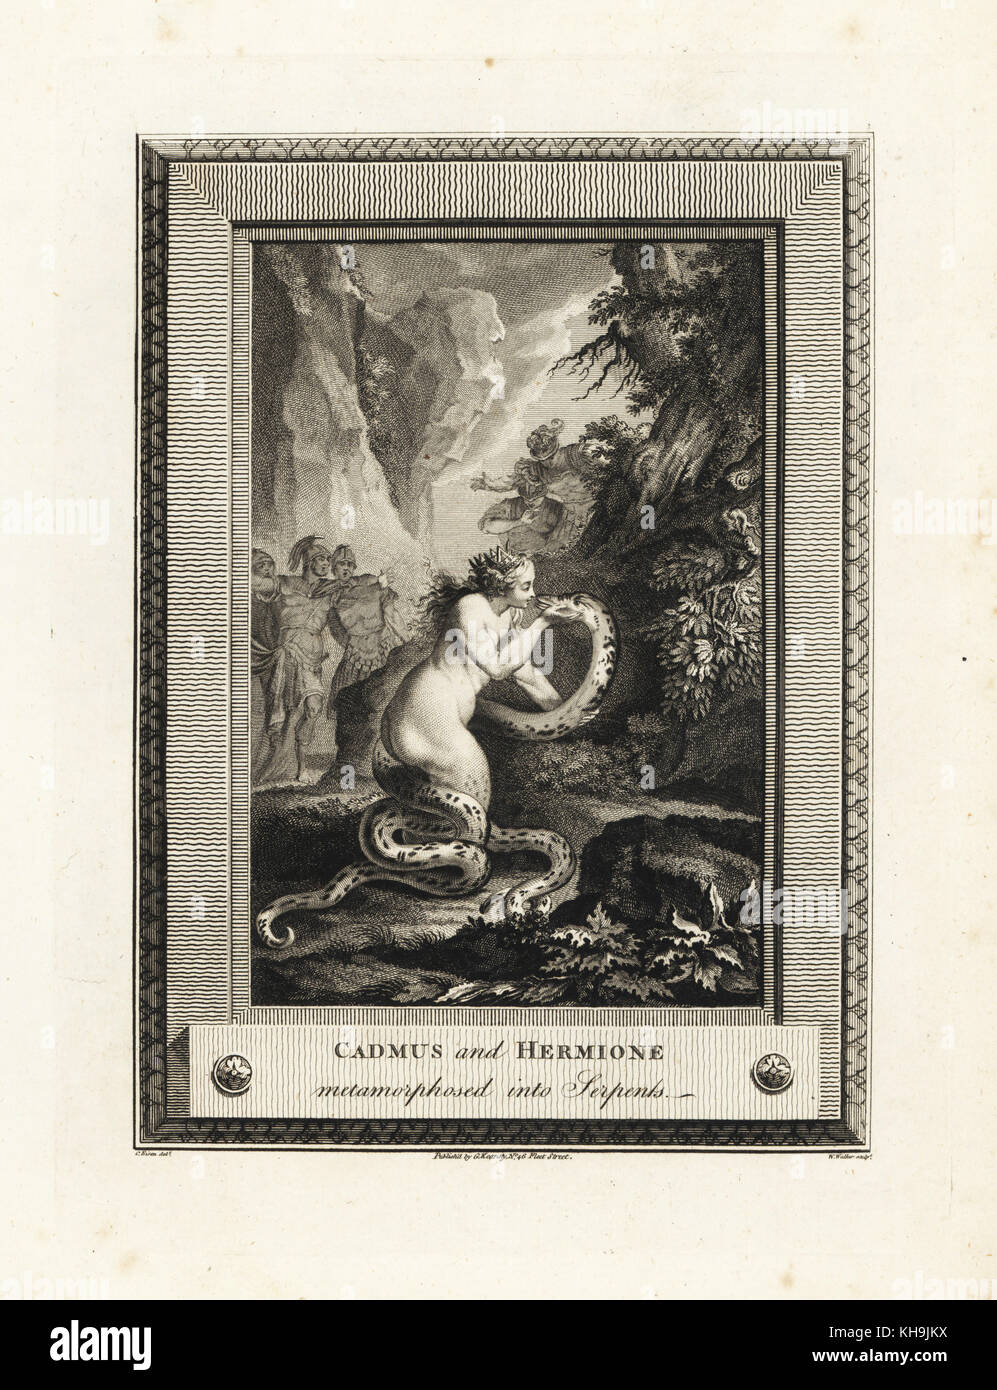 Cadmus and Hermione metamorphosed into serpents from Ovid's Metamorphoses. Copperplate engraving by W. Walker after an illustration by Charles Eisen from The Copper Plate Magazine or Monthly Treasure, G. Kearsley, London, 1778. Stock Photo